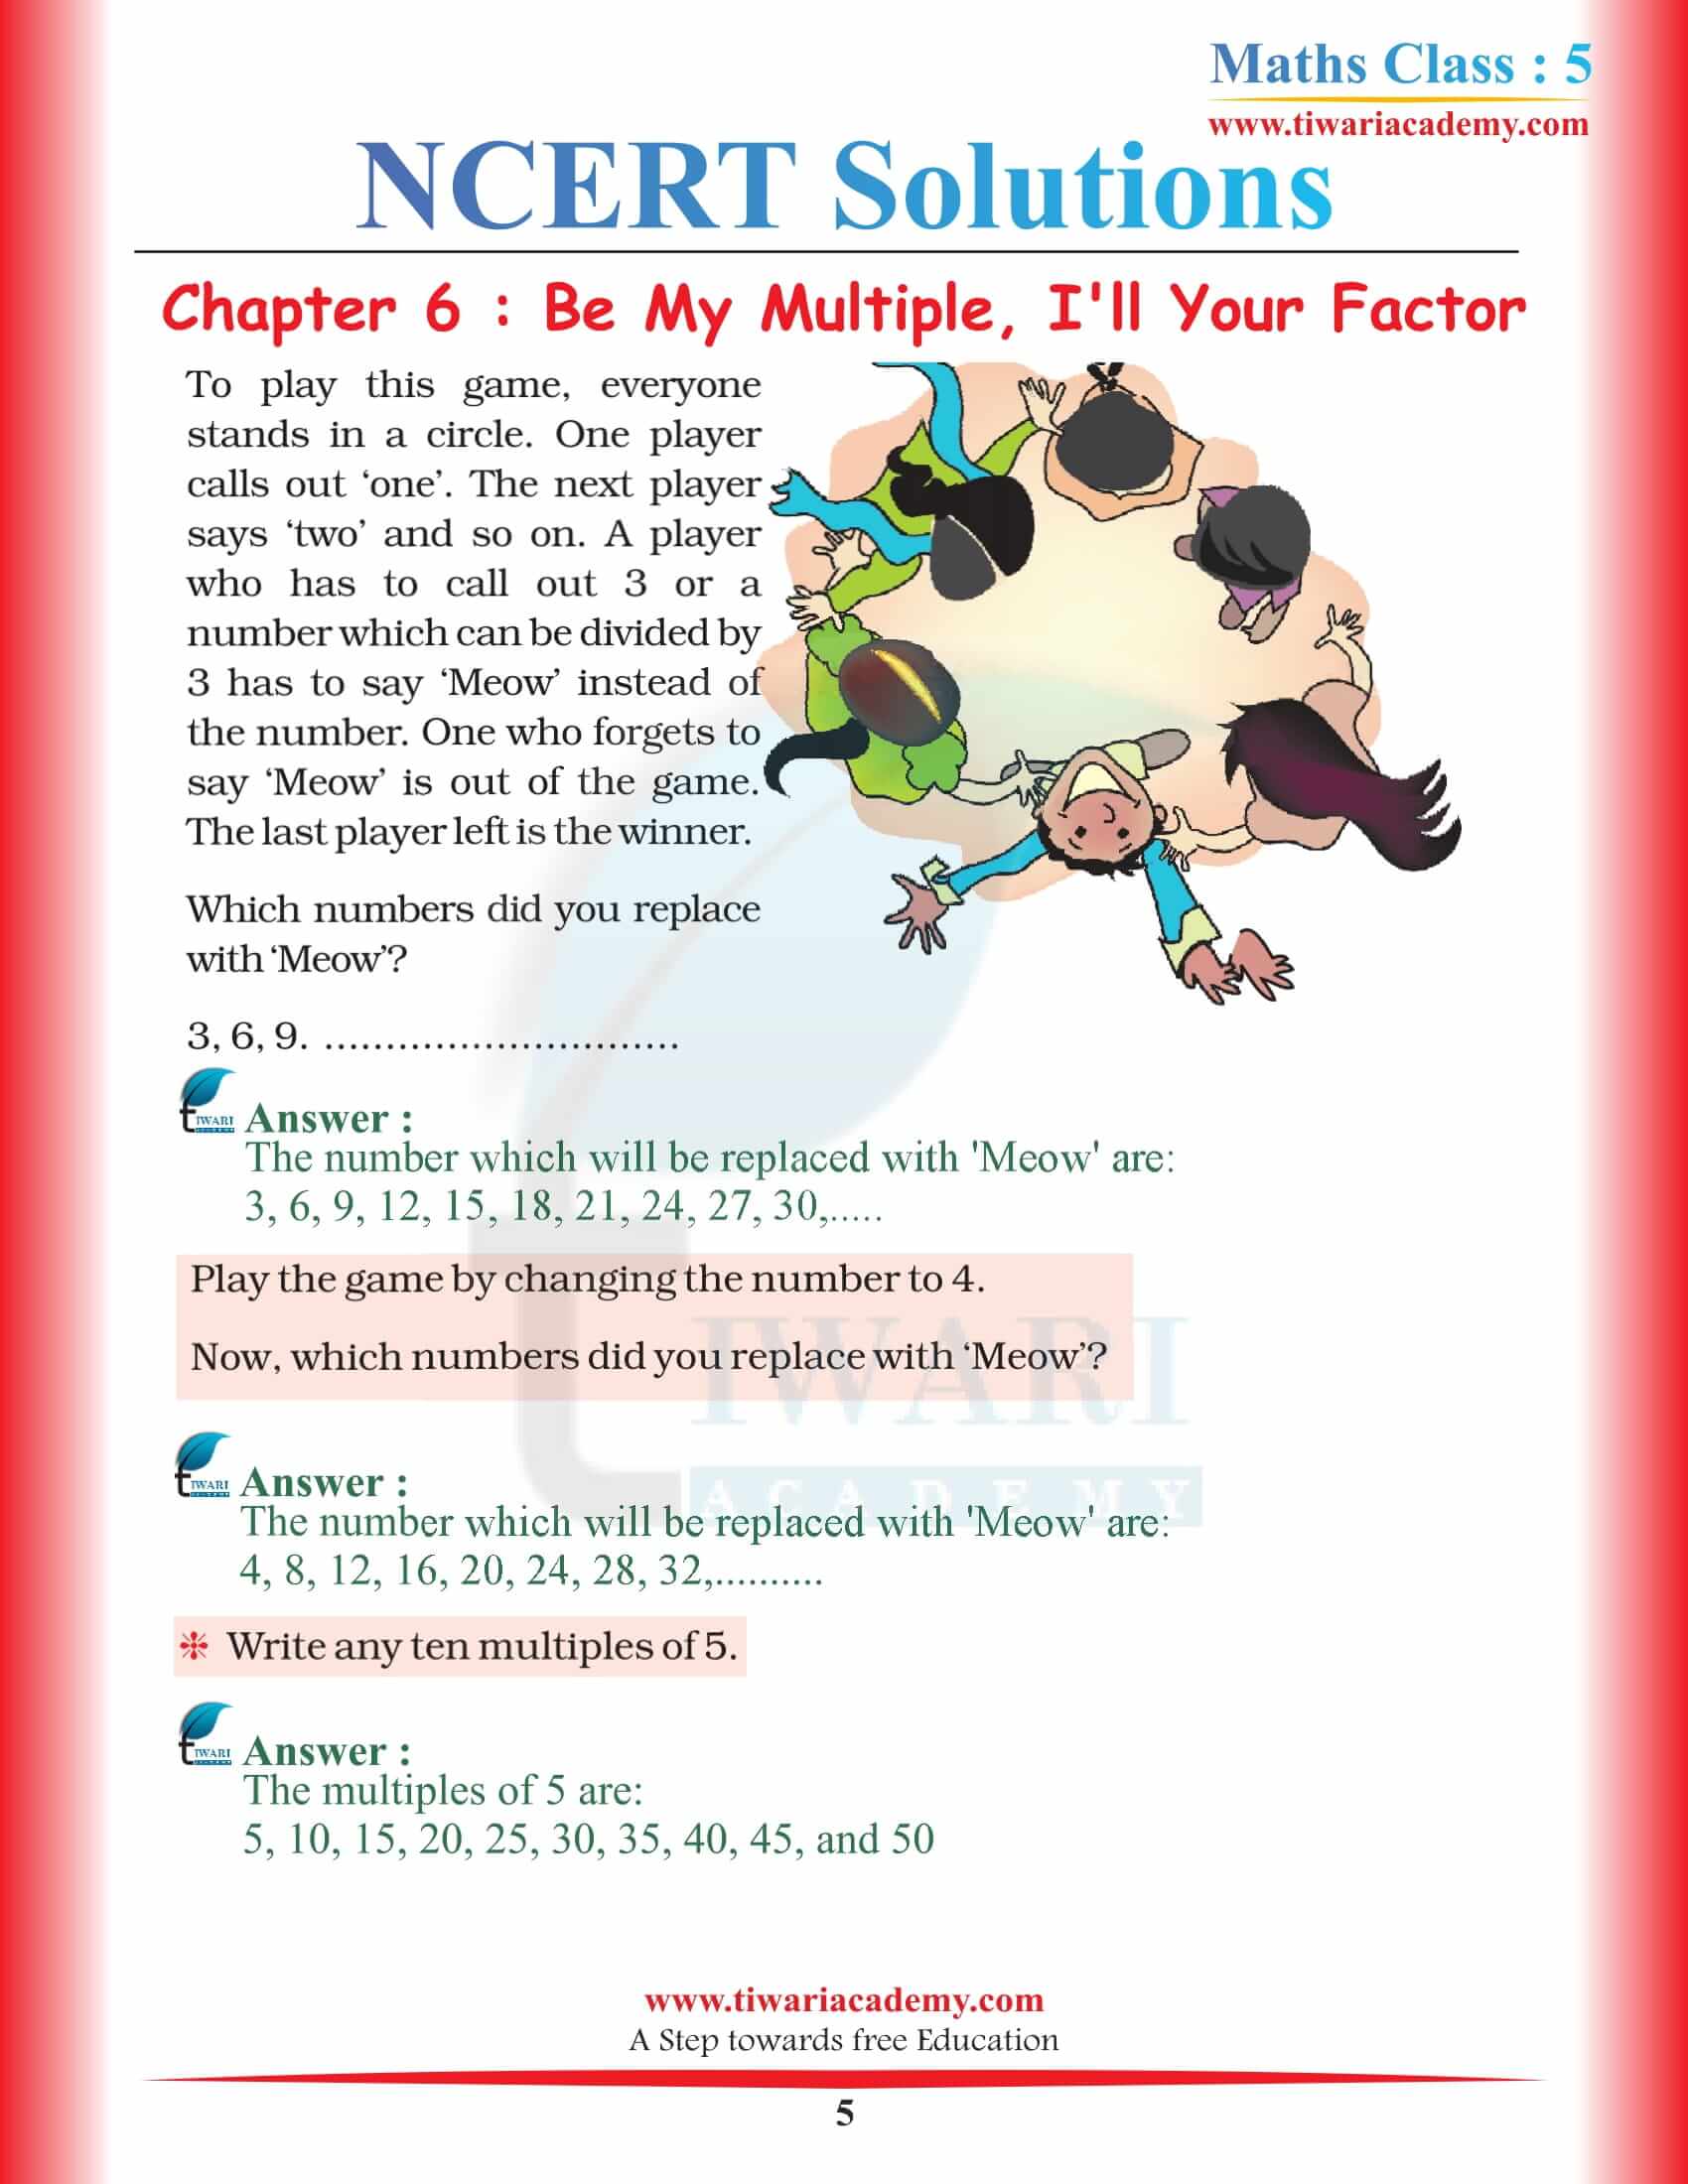 NCERT Solutions for Class 5 Maths Chapter 6 in English Medium